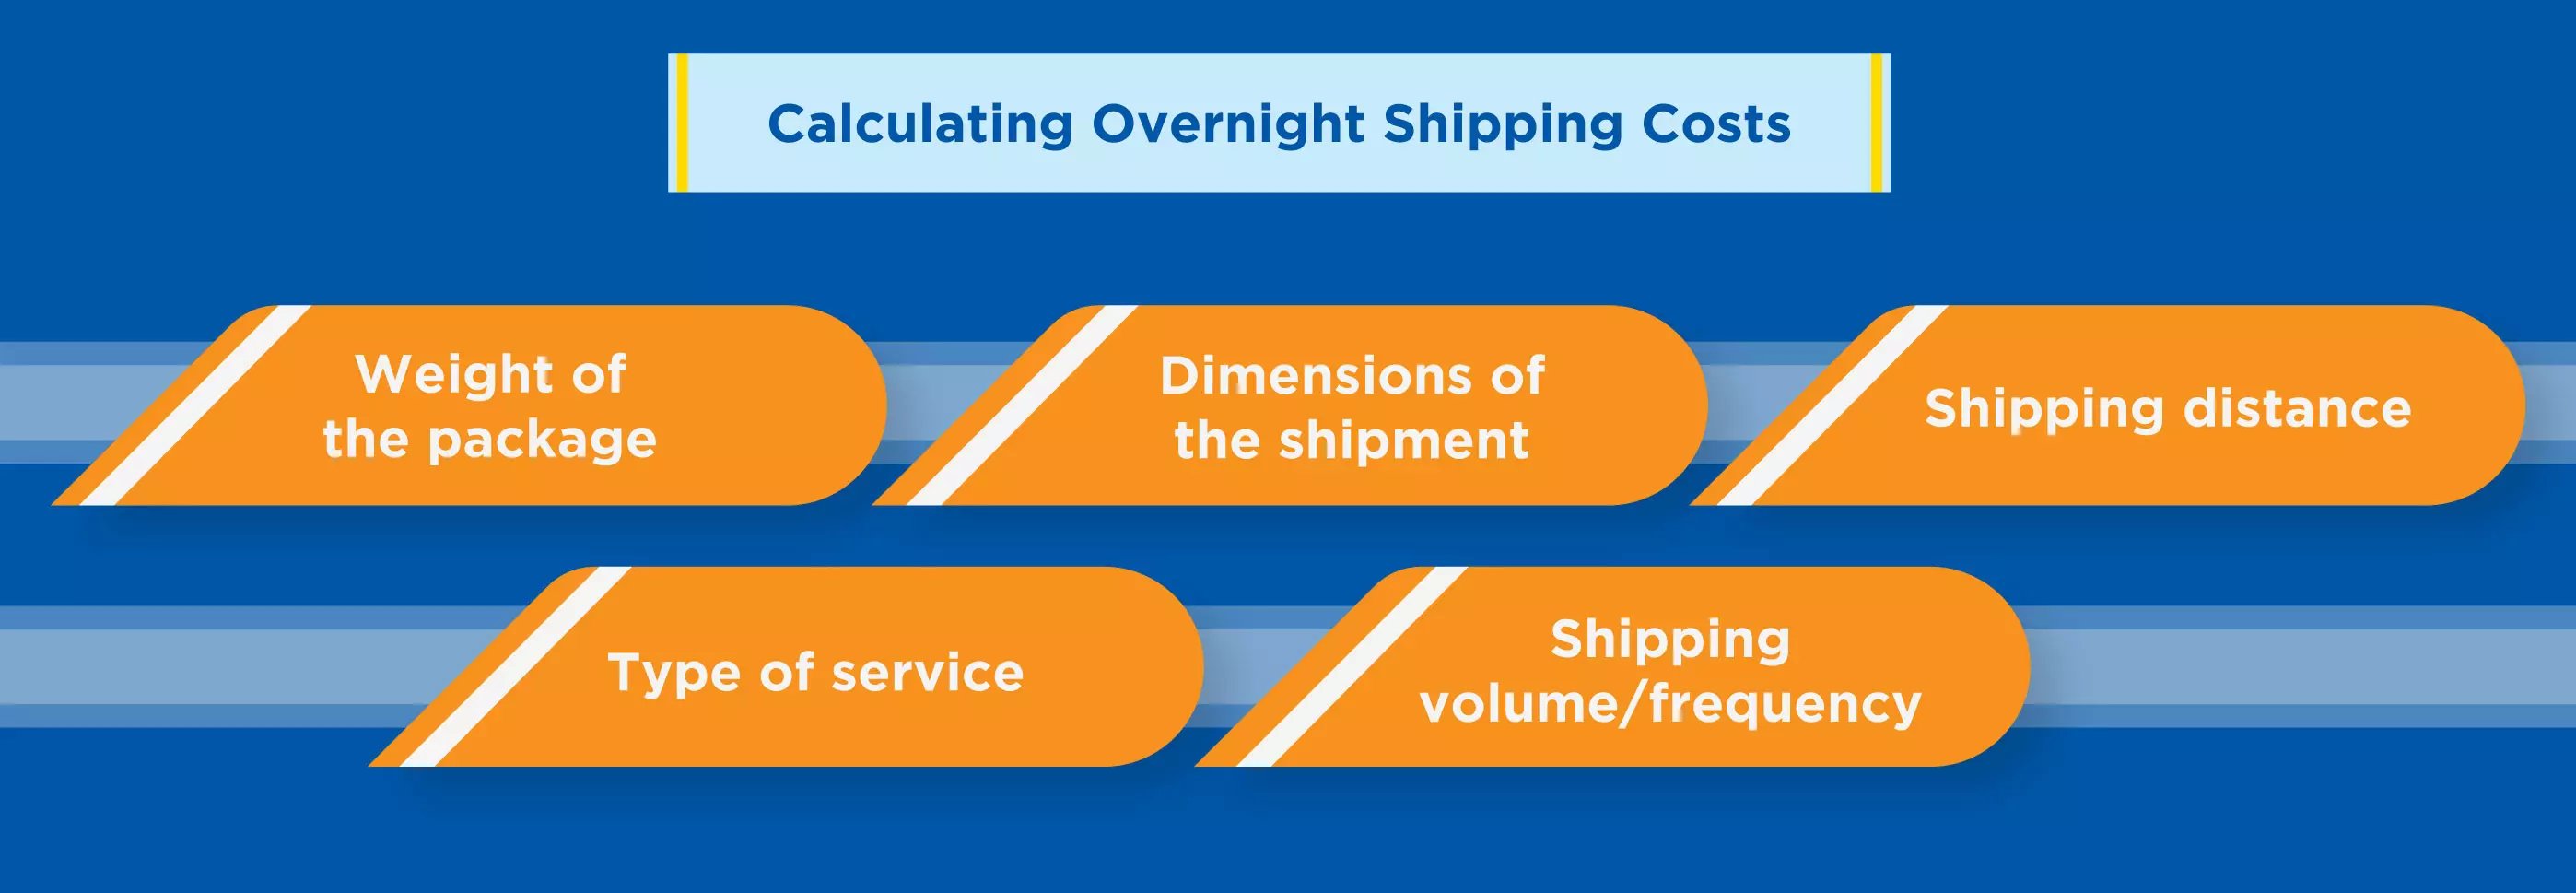 Calculating-Overnight-Shipping-Costs